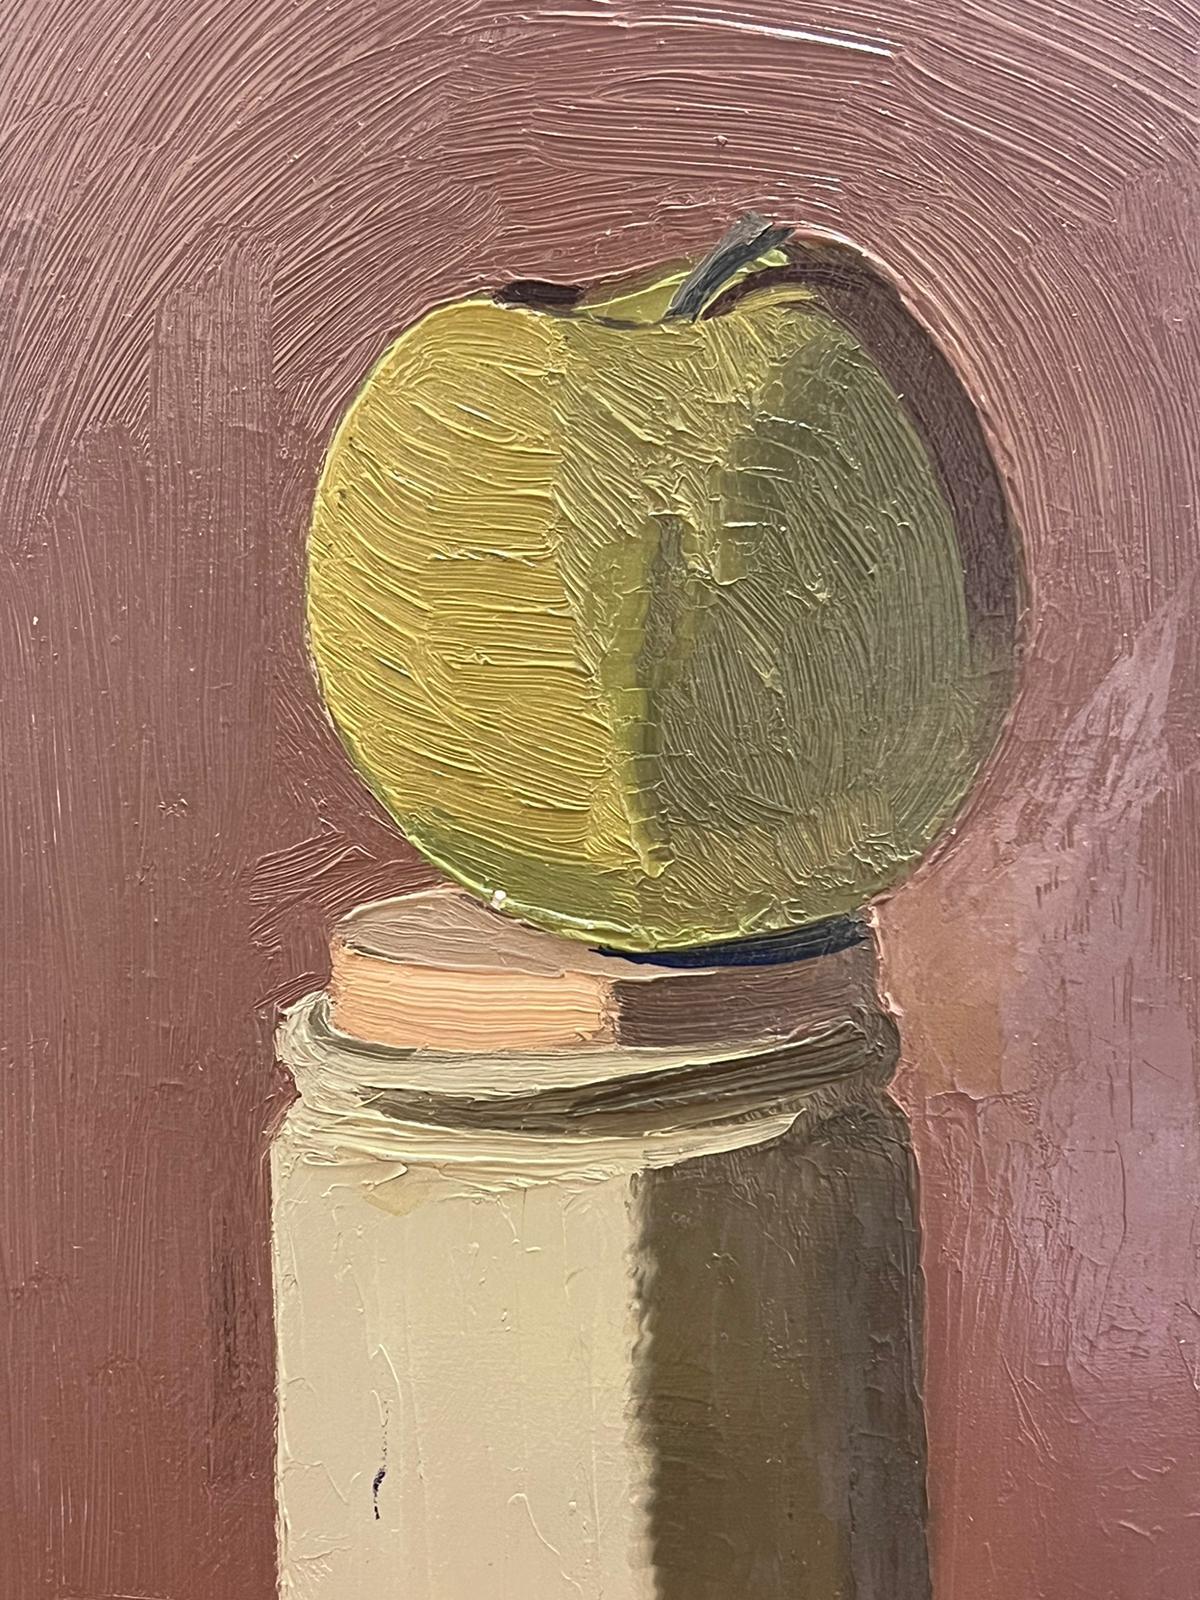 Apple & Jar
French Modernist artist, mid 20th century
oil on board unframed
board: 10 x 6 inches
provenance: private collection, France
condition: very good and sound condition